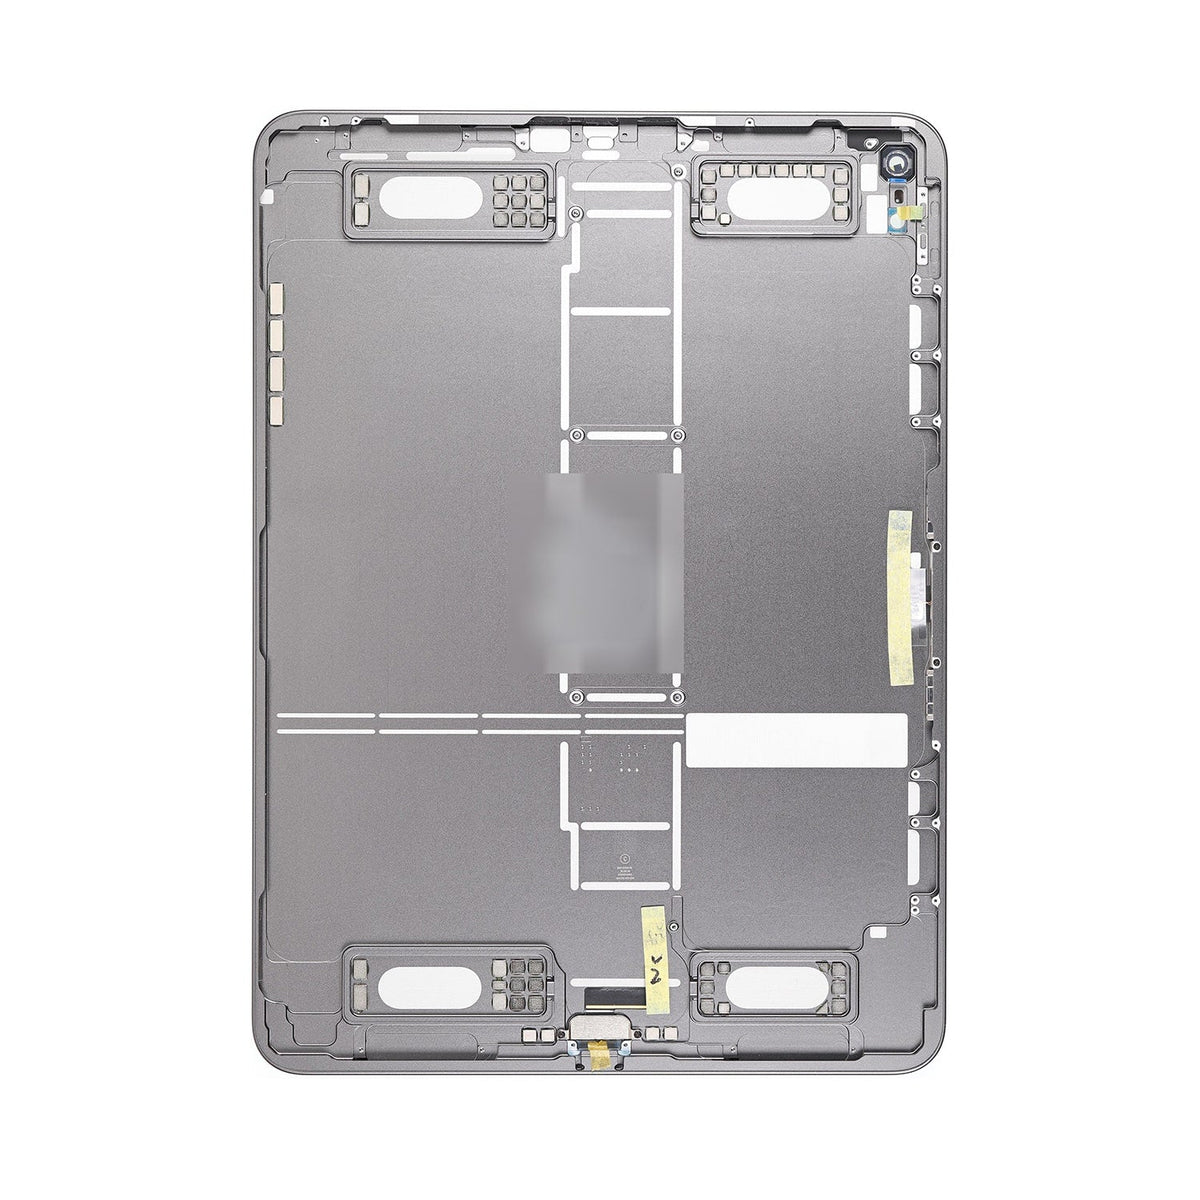 BACK COVER WIFI VERSION FOR IPAD PRO 11(1ST)- GRAY